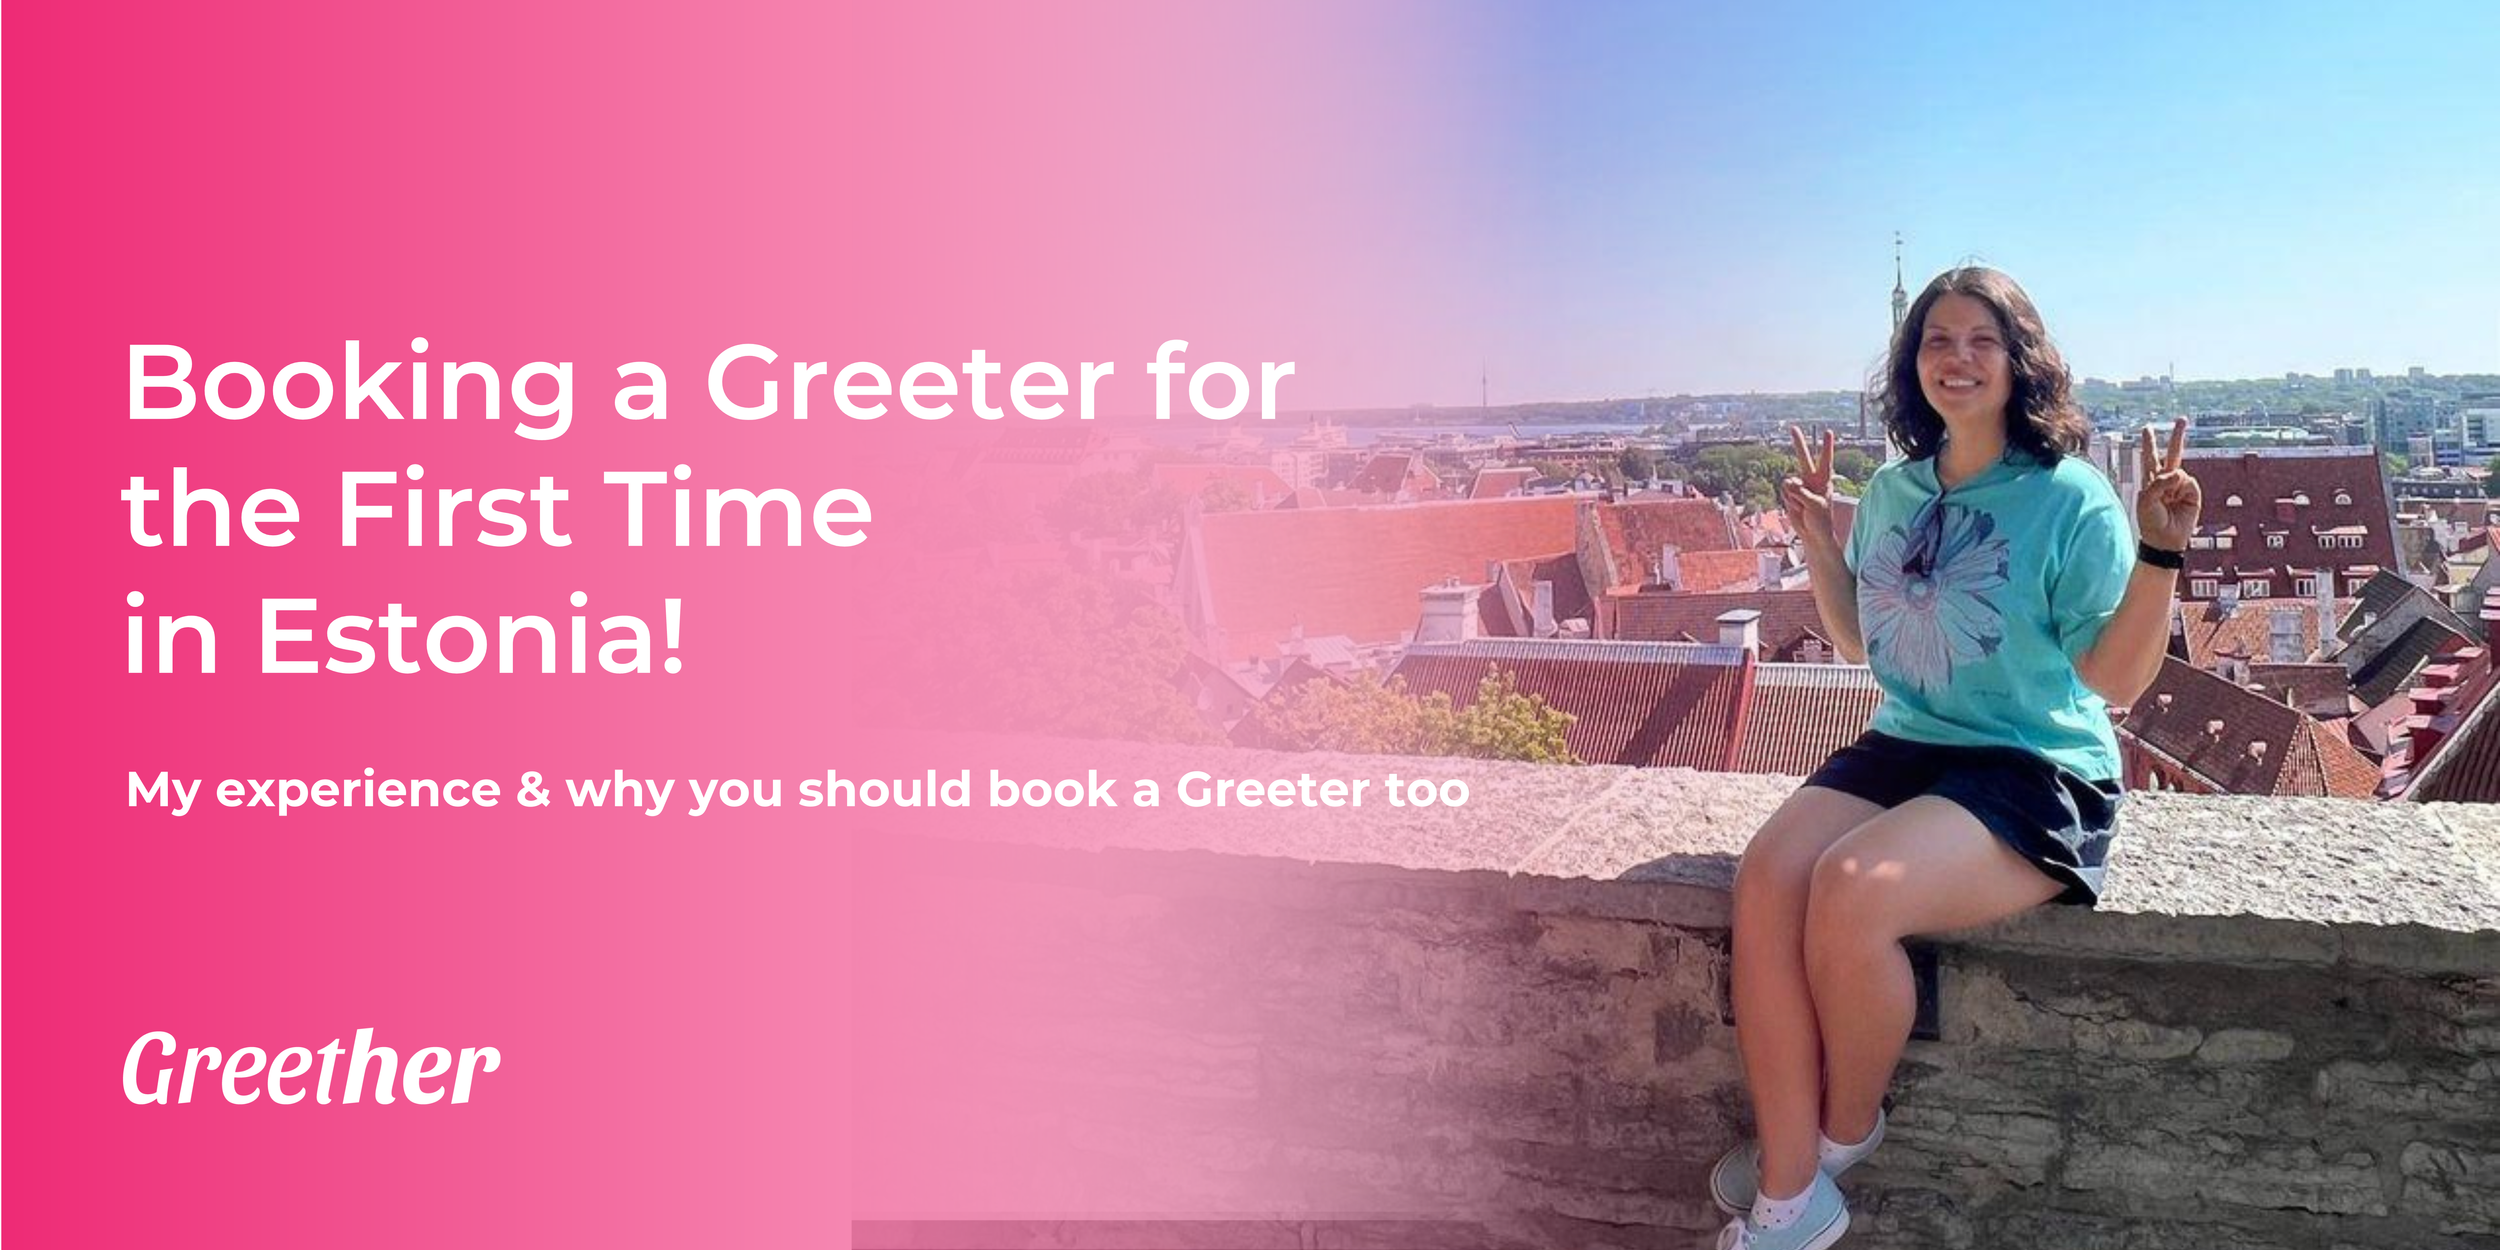 Booking a Greeter for the First Time in Estonia &amp; why you should do it too!